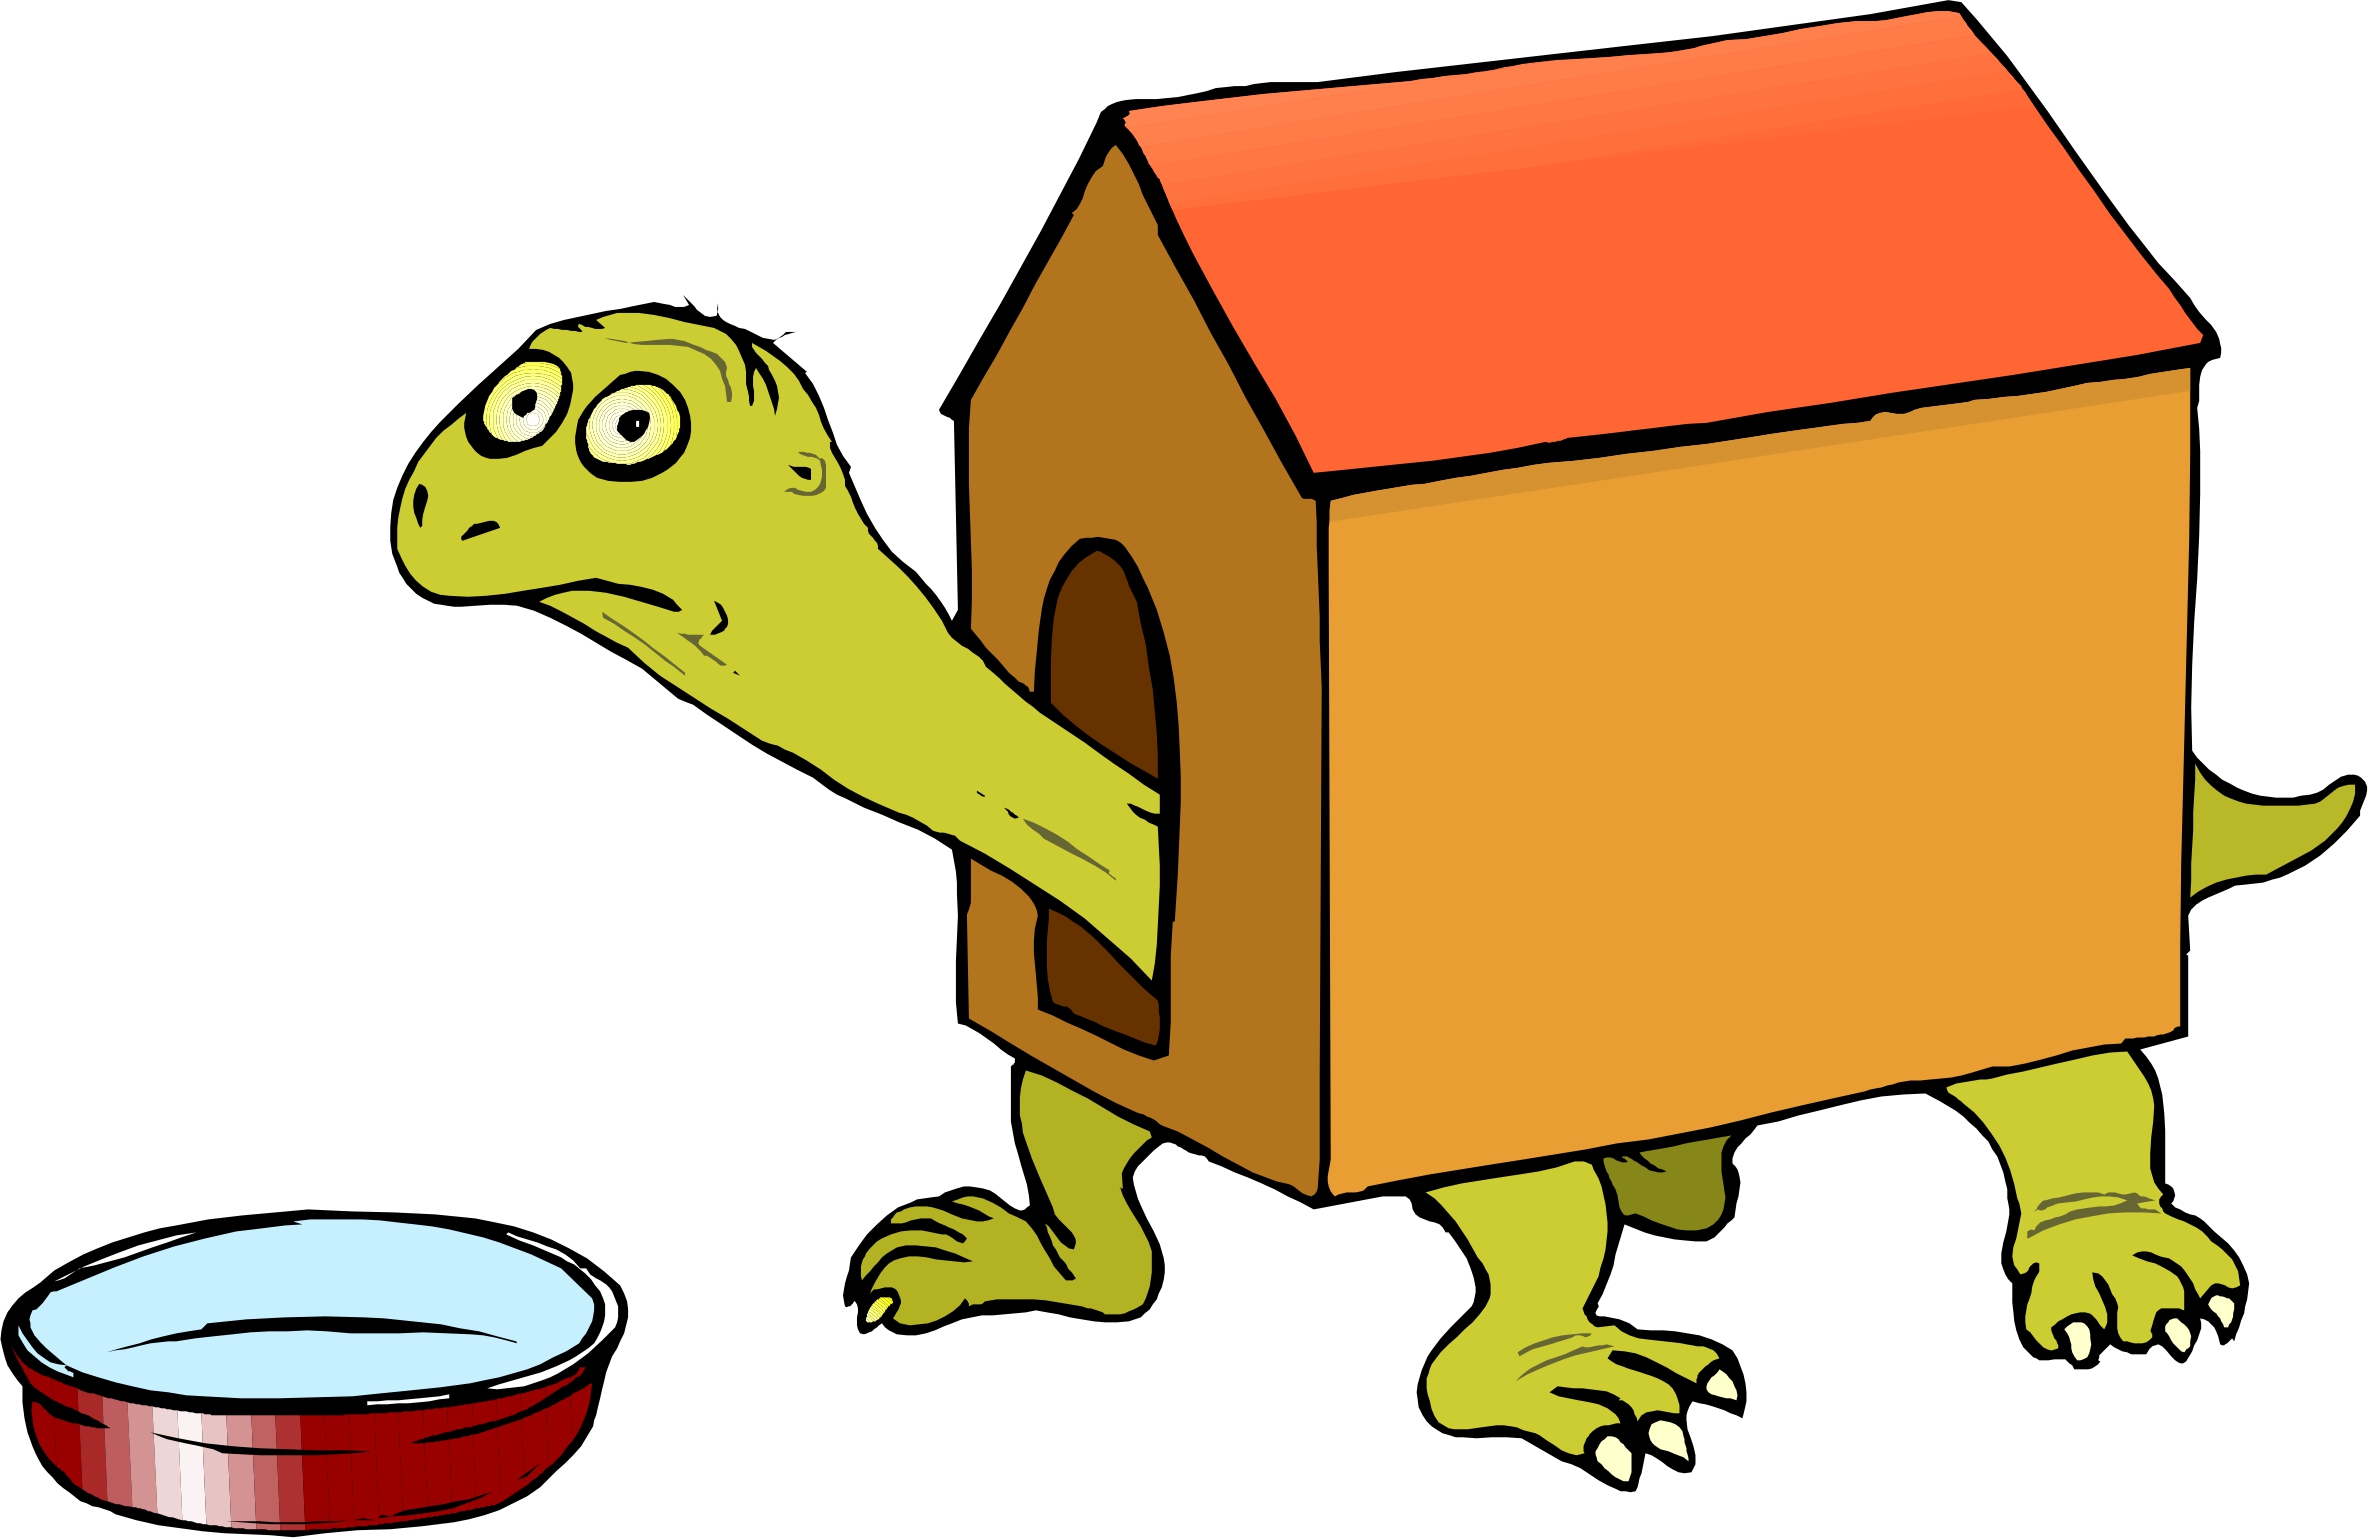 Free Cartoon Dog House, Download Free Cartoon Dog House png images